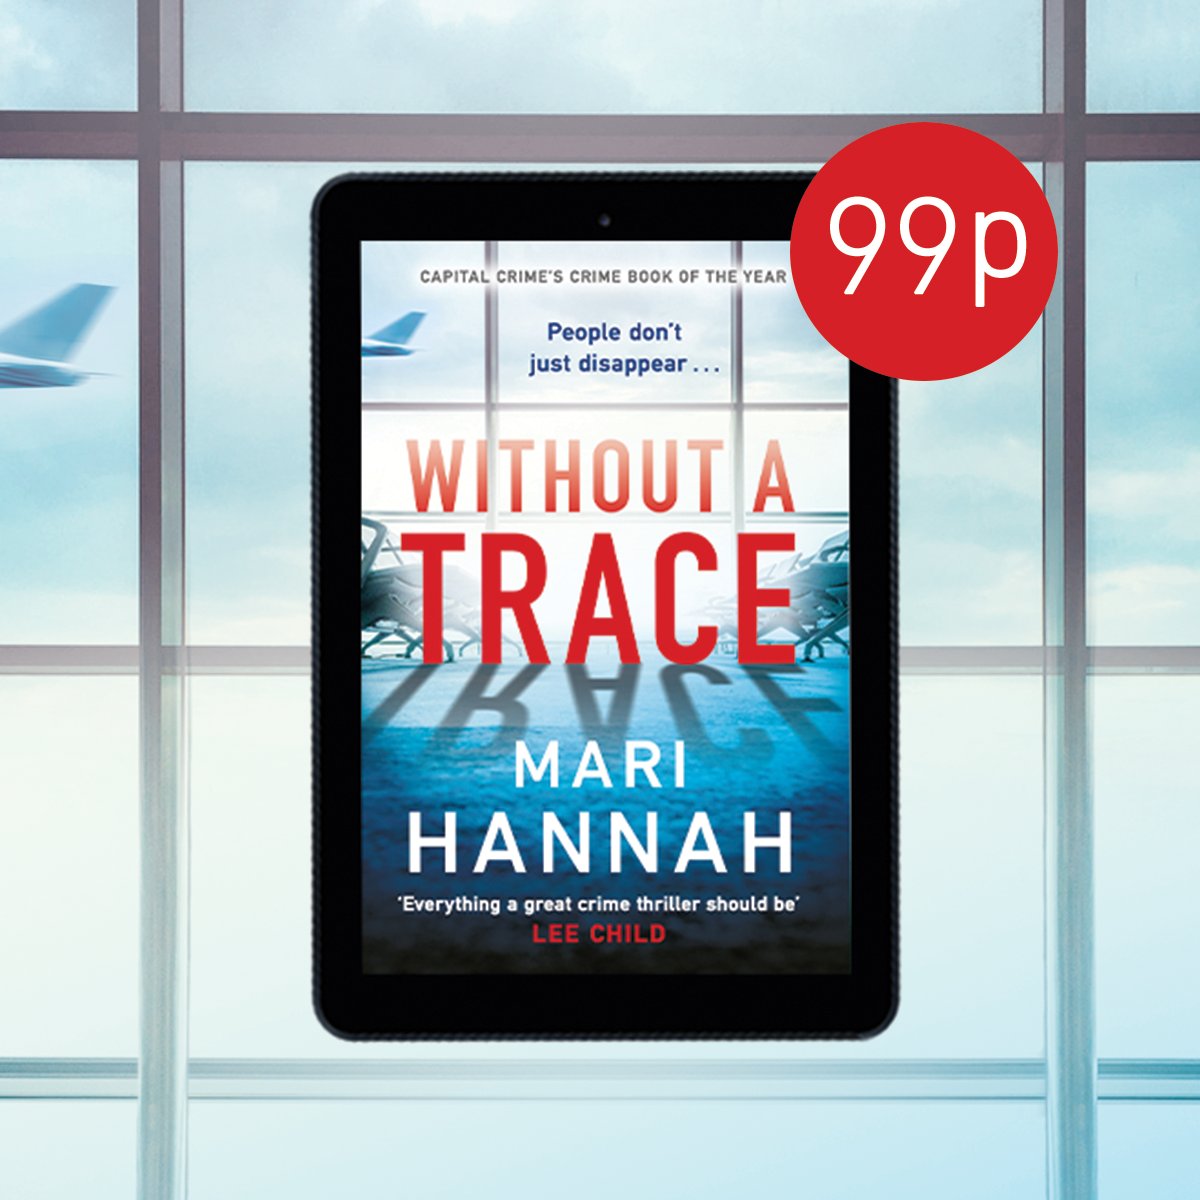 A FATAL CRASH 🛩️ A PRIVATE TRAGEDY ⚰️ A SEARCH FOR THE TRUTH 🔎 This nail-biting thriller you won't be able to put down from award-winning author @mariwriter is just 99p until Thursday! brnw.ch/21wHk9D